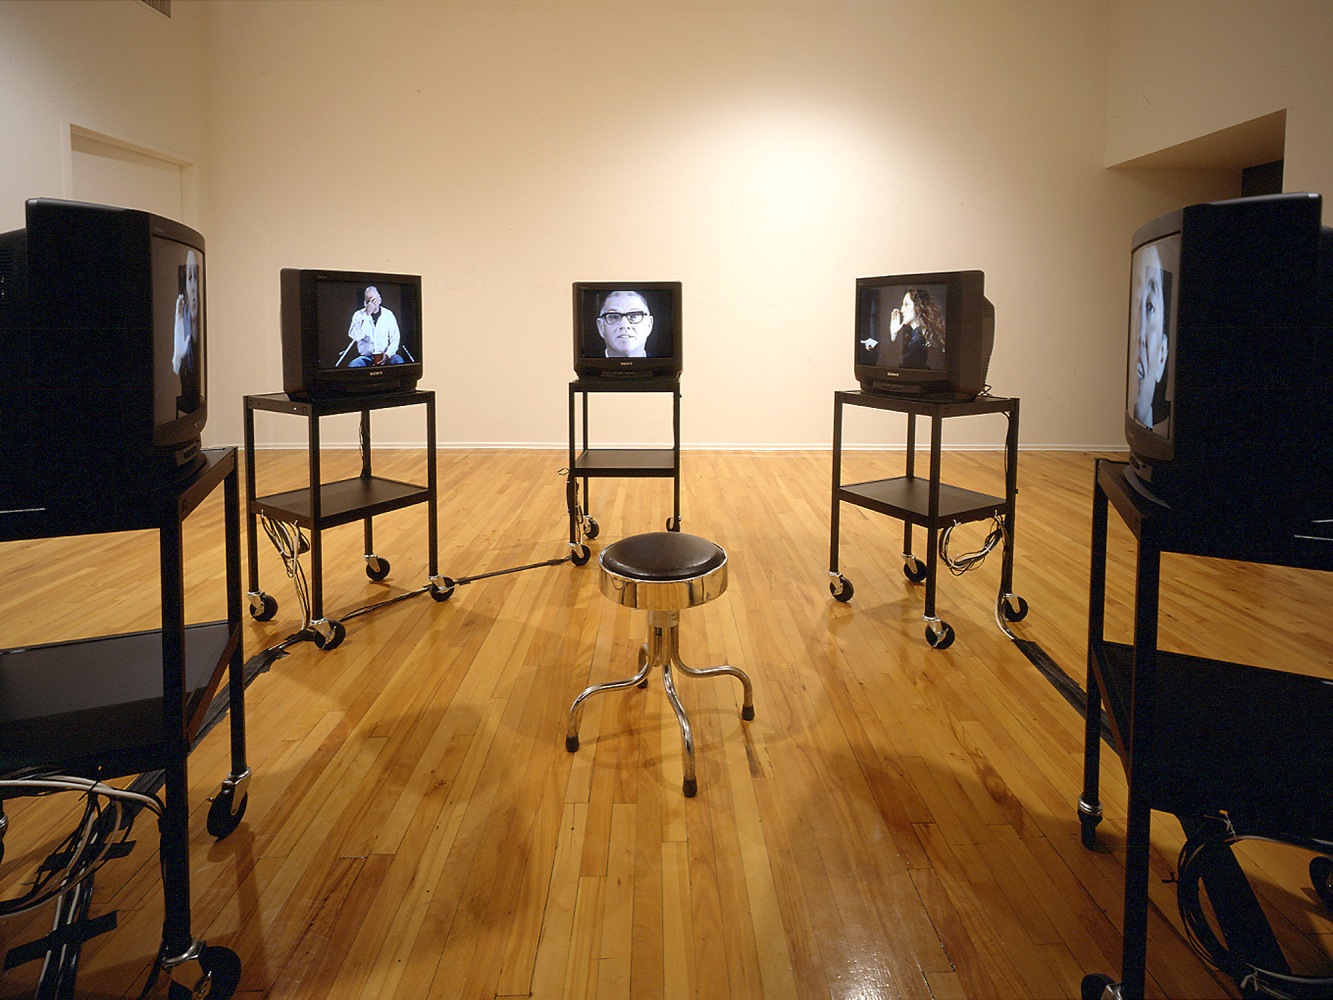 Bruce Nauman
World Peace (Received), 1996
5 video discs, 5 monitors, 5 video disc players, 5 video switchers, remote control, stool, 6 utility carts
approximately 126 inches (320 cm) diameter
SW 96378
Collection of The Saint Louis Art Museum